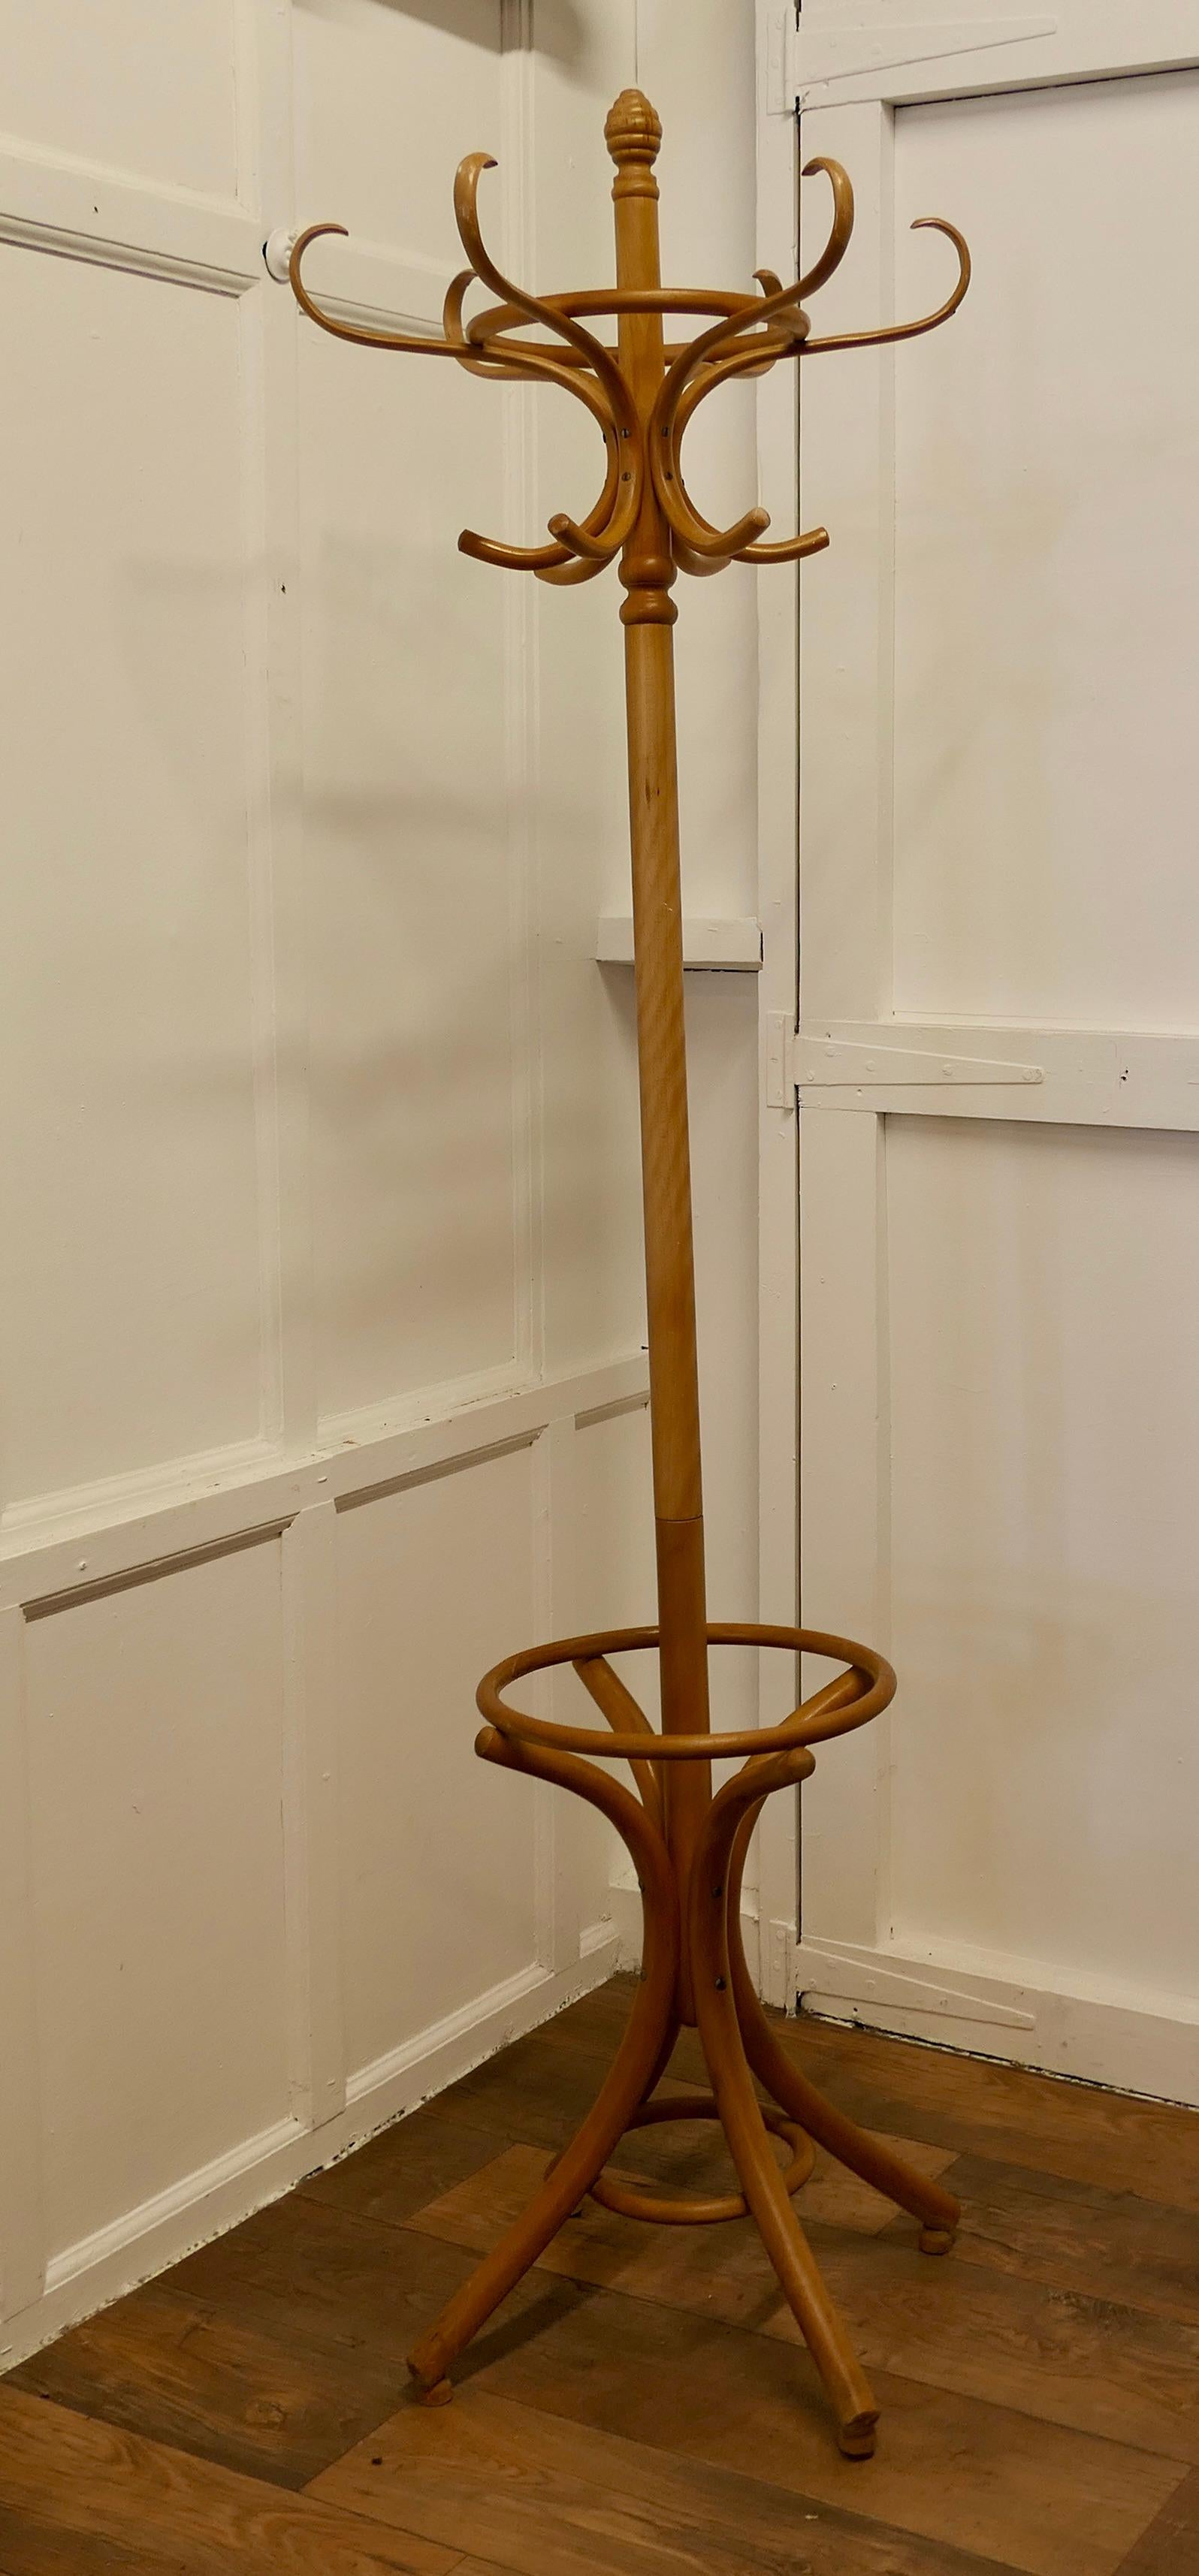 Art Deco Light Coloured Bent Wood Hall Stand

This is a very attractive piece it is a Round Hat & Coat Hall Stand, the stand has 6 Large Curved Bentwood Hat & Coat Hooks at the top and 4 large scrolling Legs forming the umbrella receptacle at the